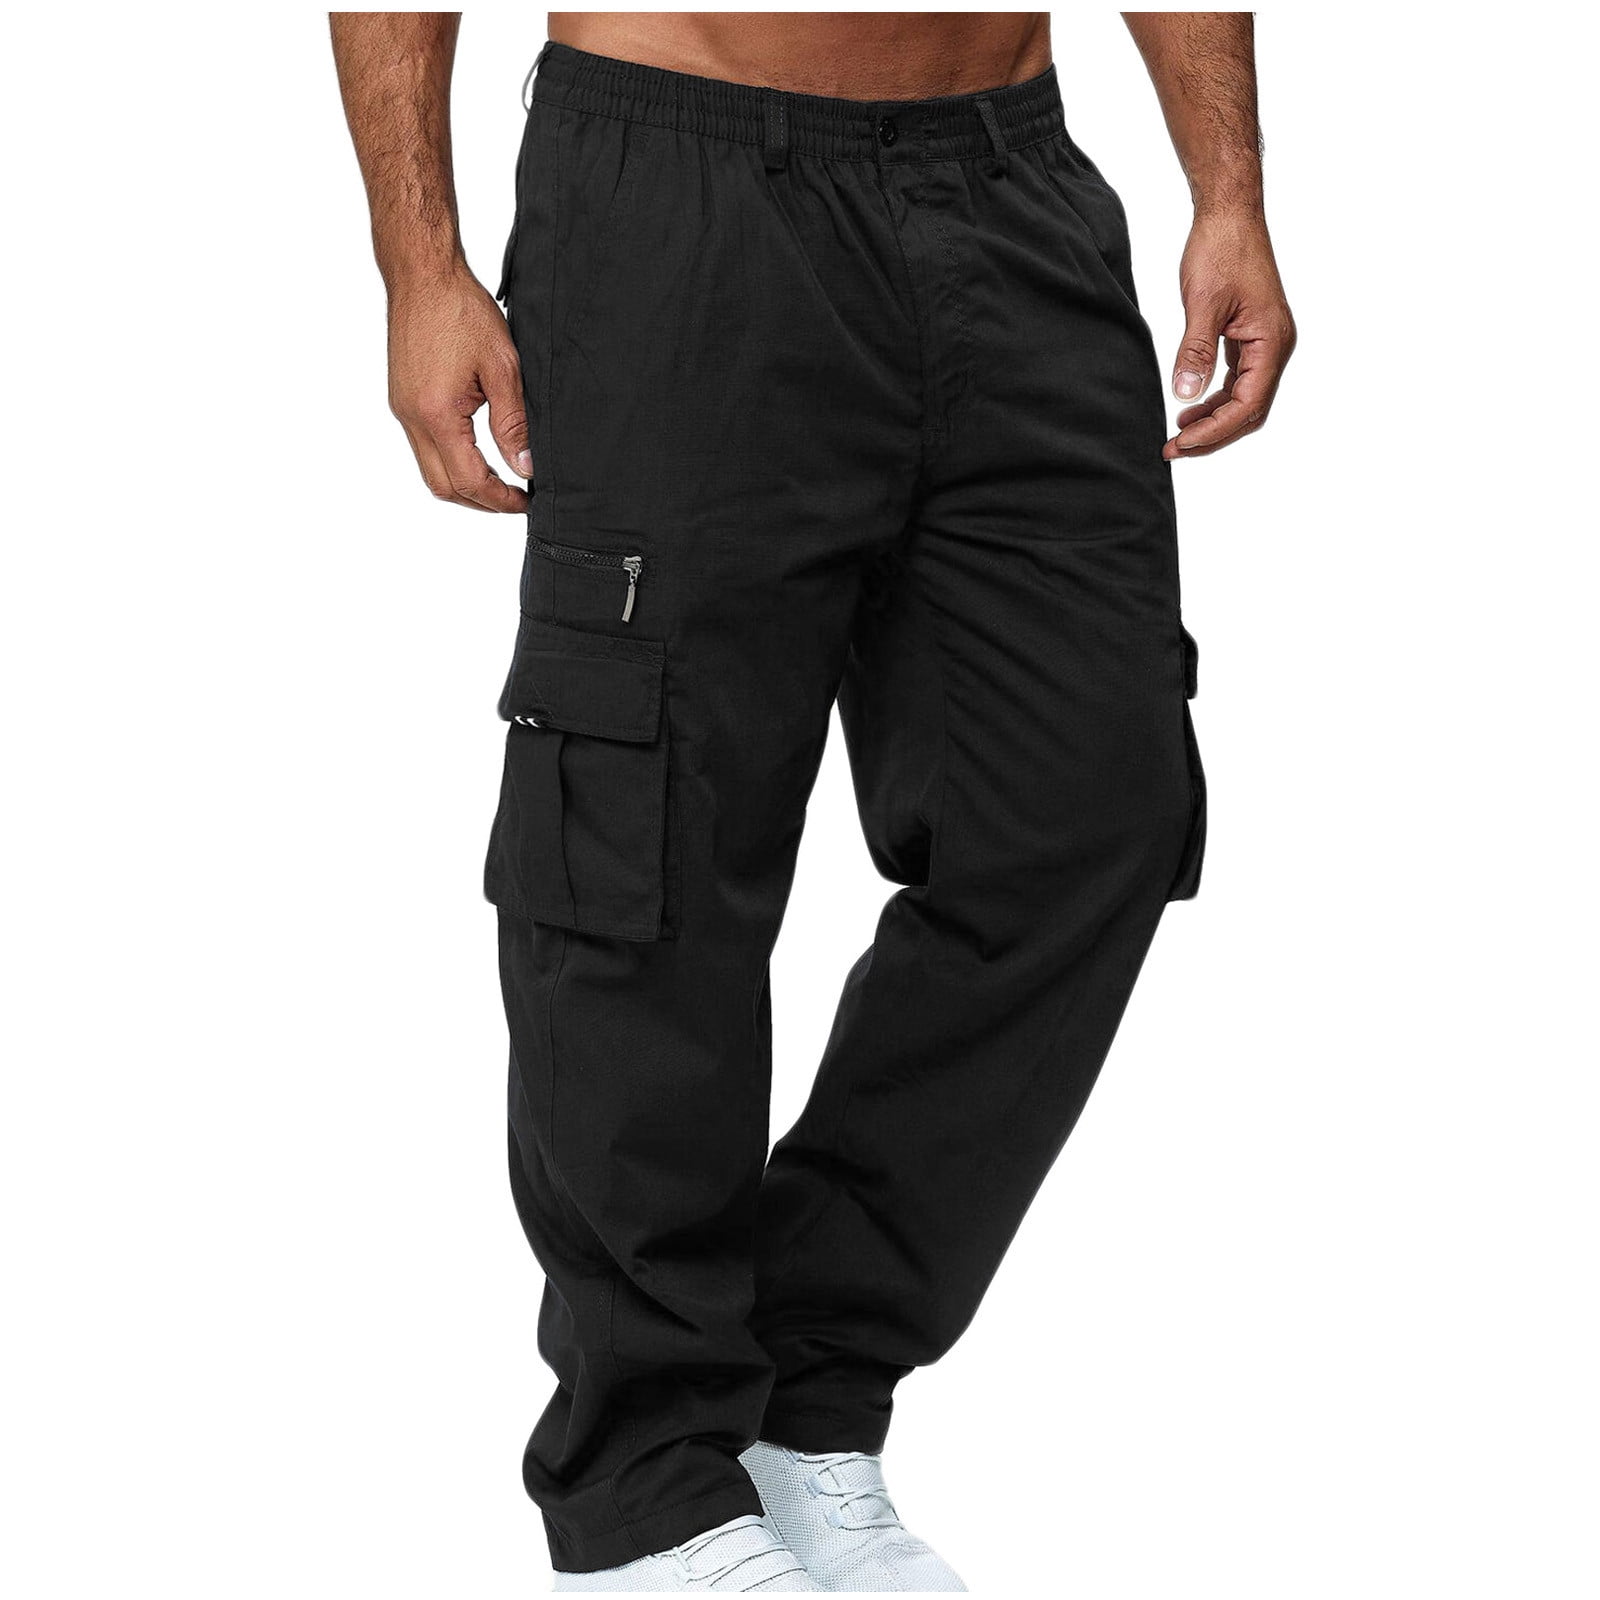 jsaierl Cargo Pants for Men Straight Leg Loose Fit Pants Big & Tall ...